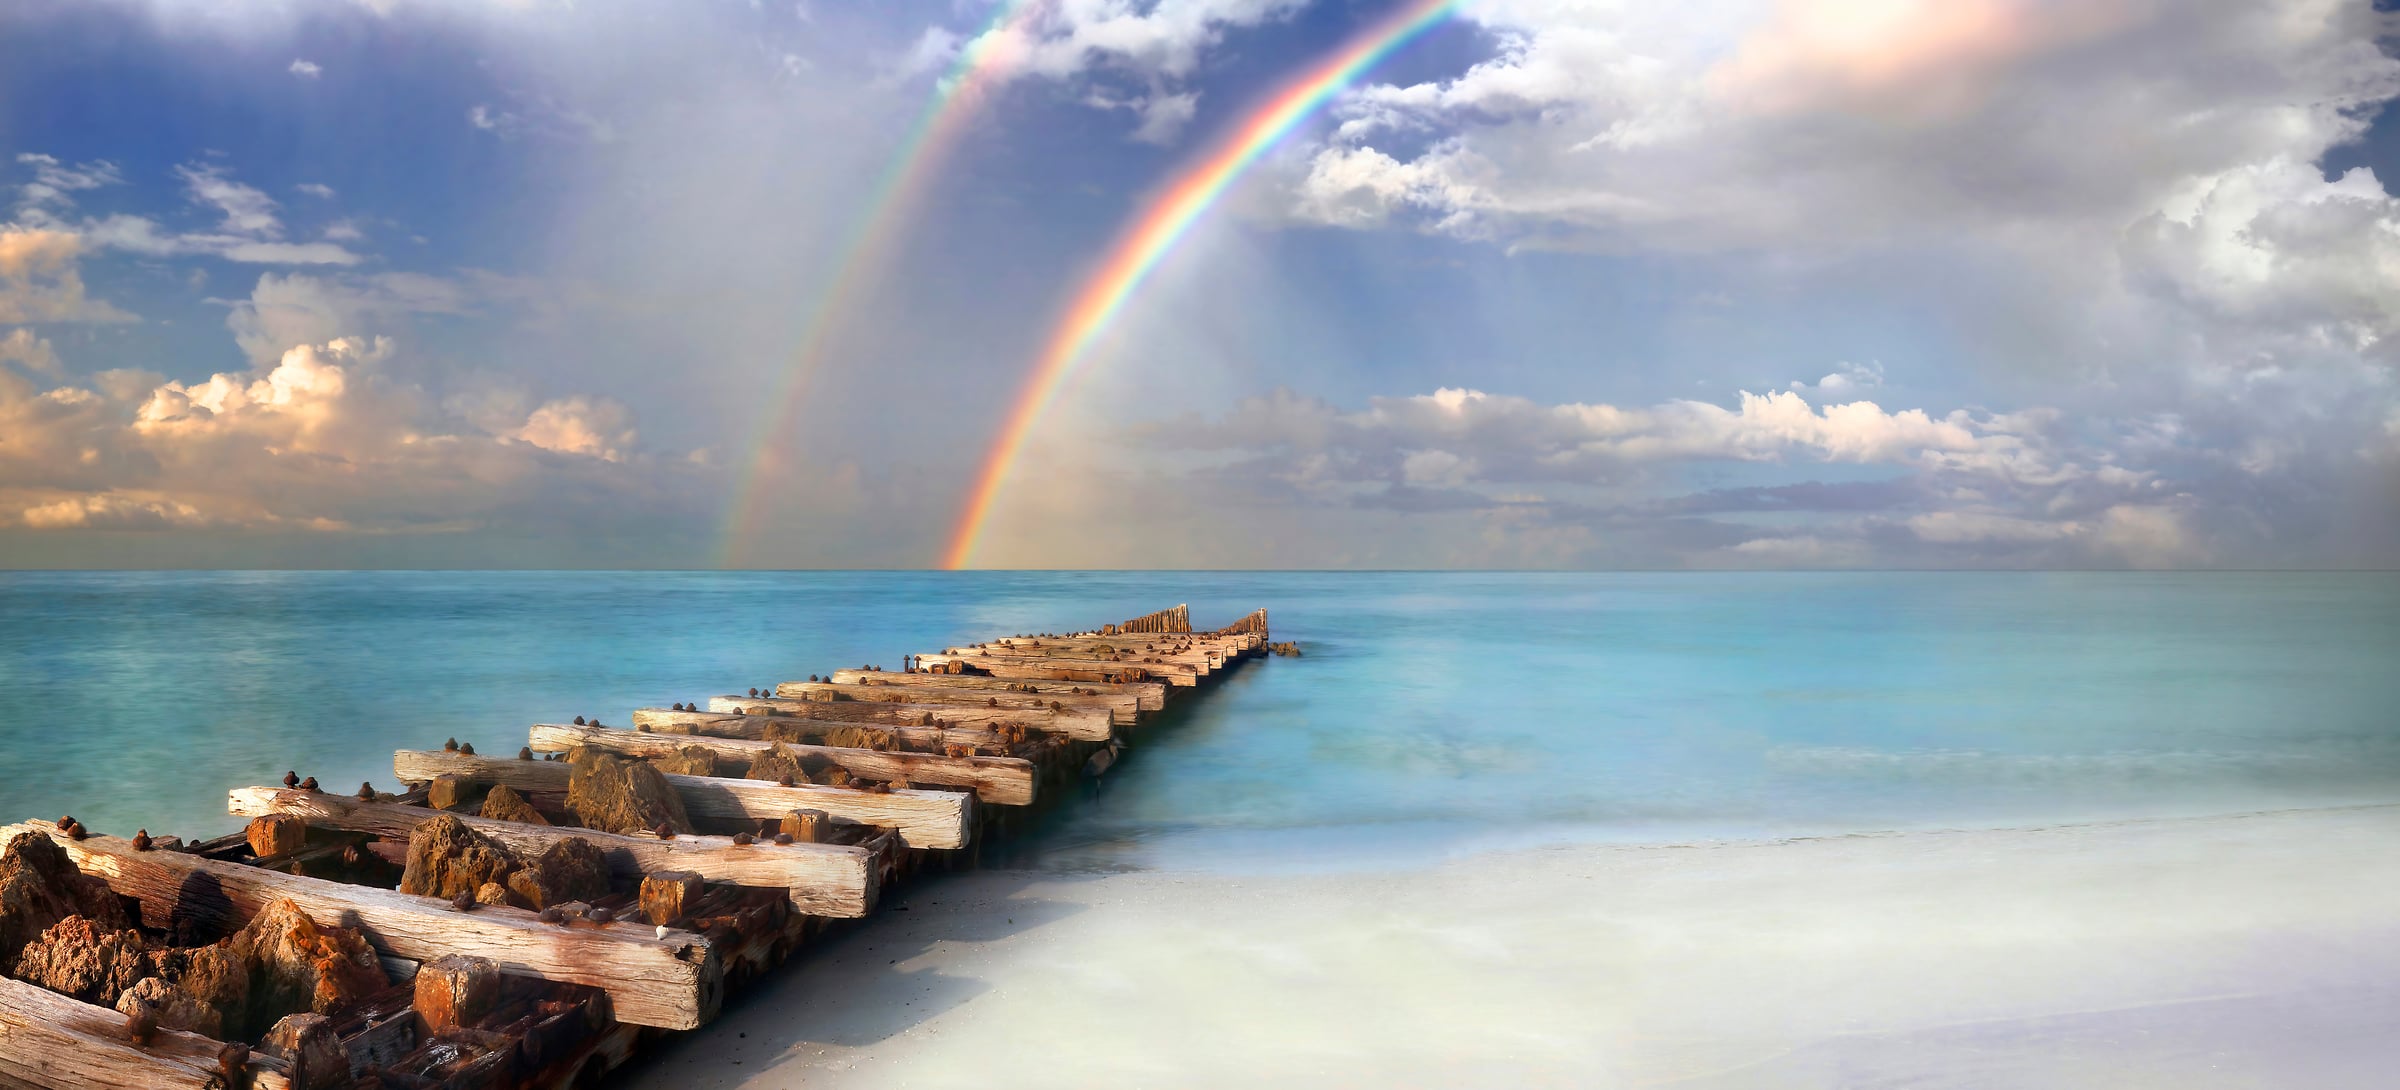 249 megapixels! A very high resolution, large-format VAST photo print of a rainbow on a beach with the ocean; landscape photograph created by Phil Crawshay in Coquina Beach, Bradenton, Florida.